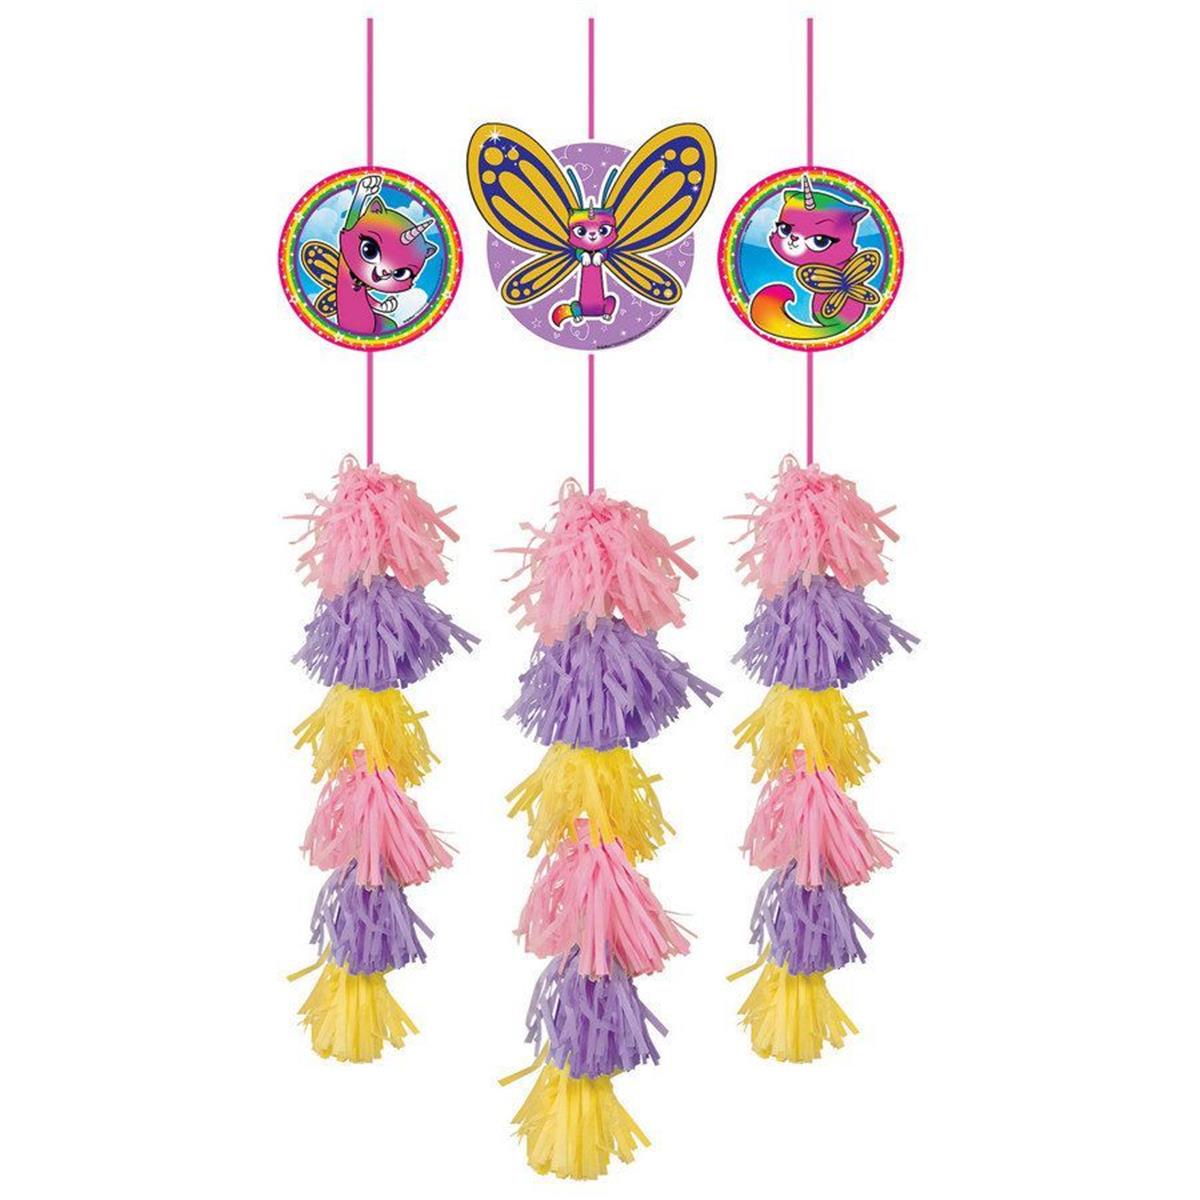 307502 Rainbow Butterfly Unicorn Kitty Hanging Tassel Decorations, Pack Of 3